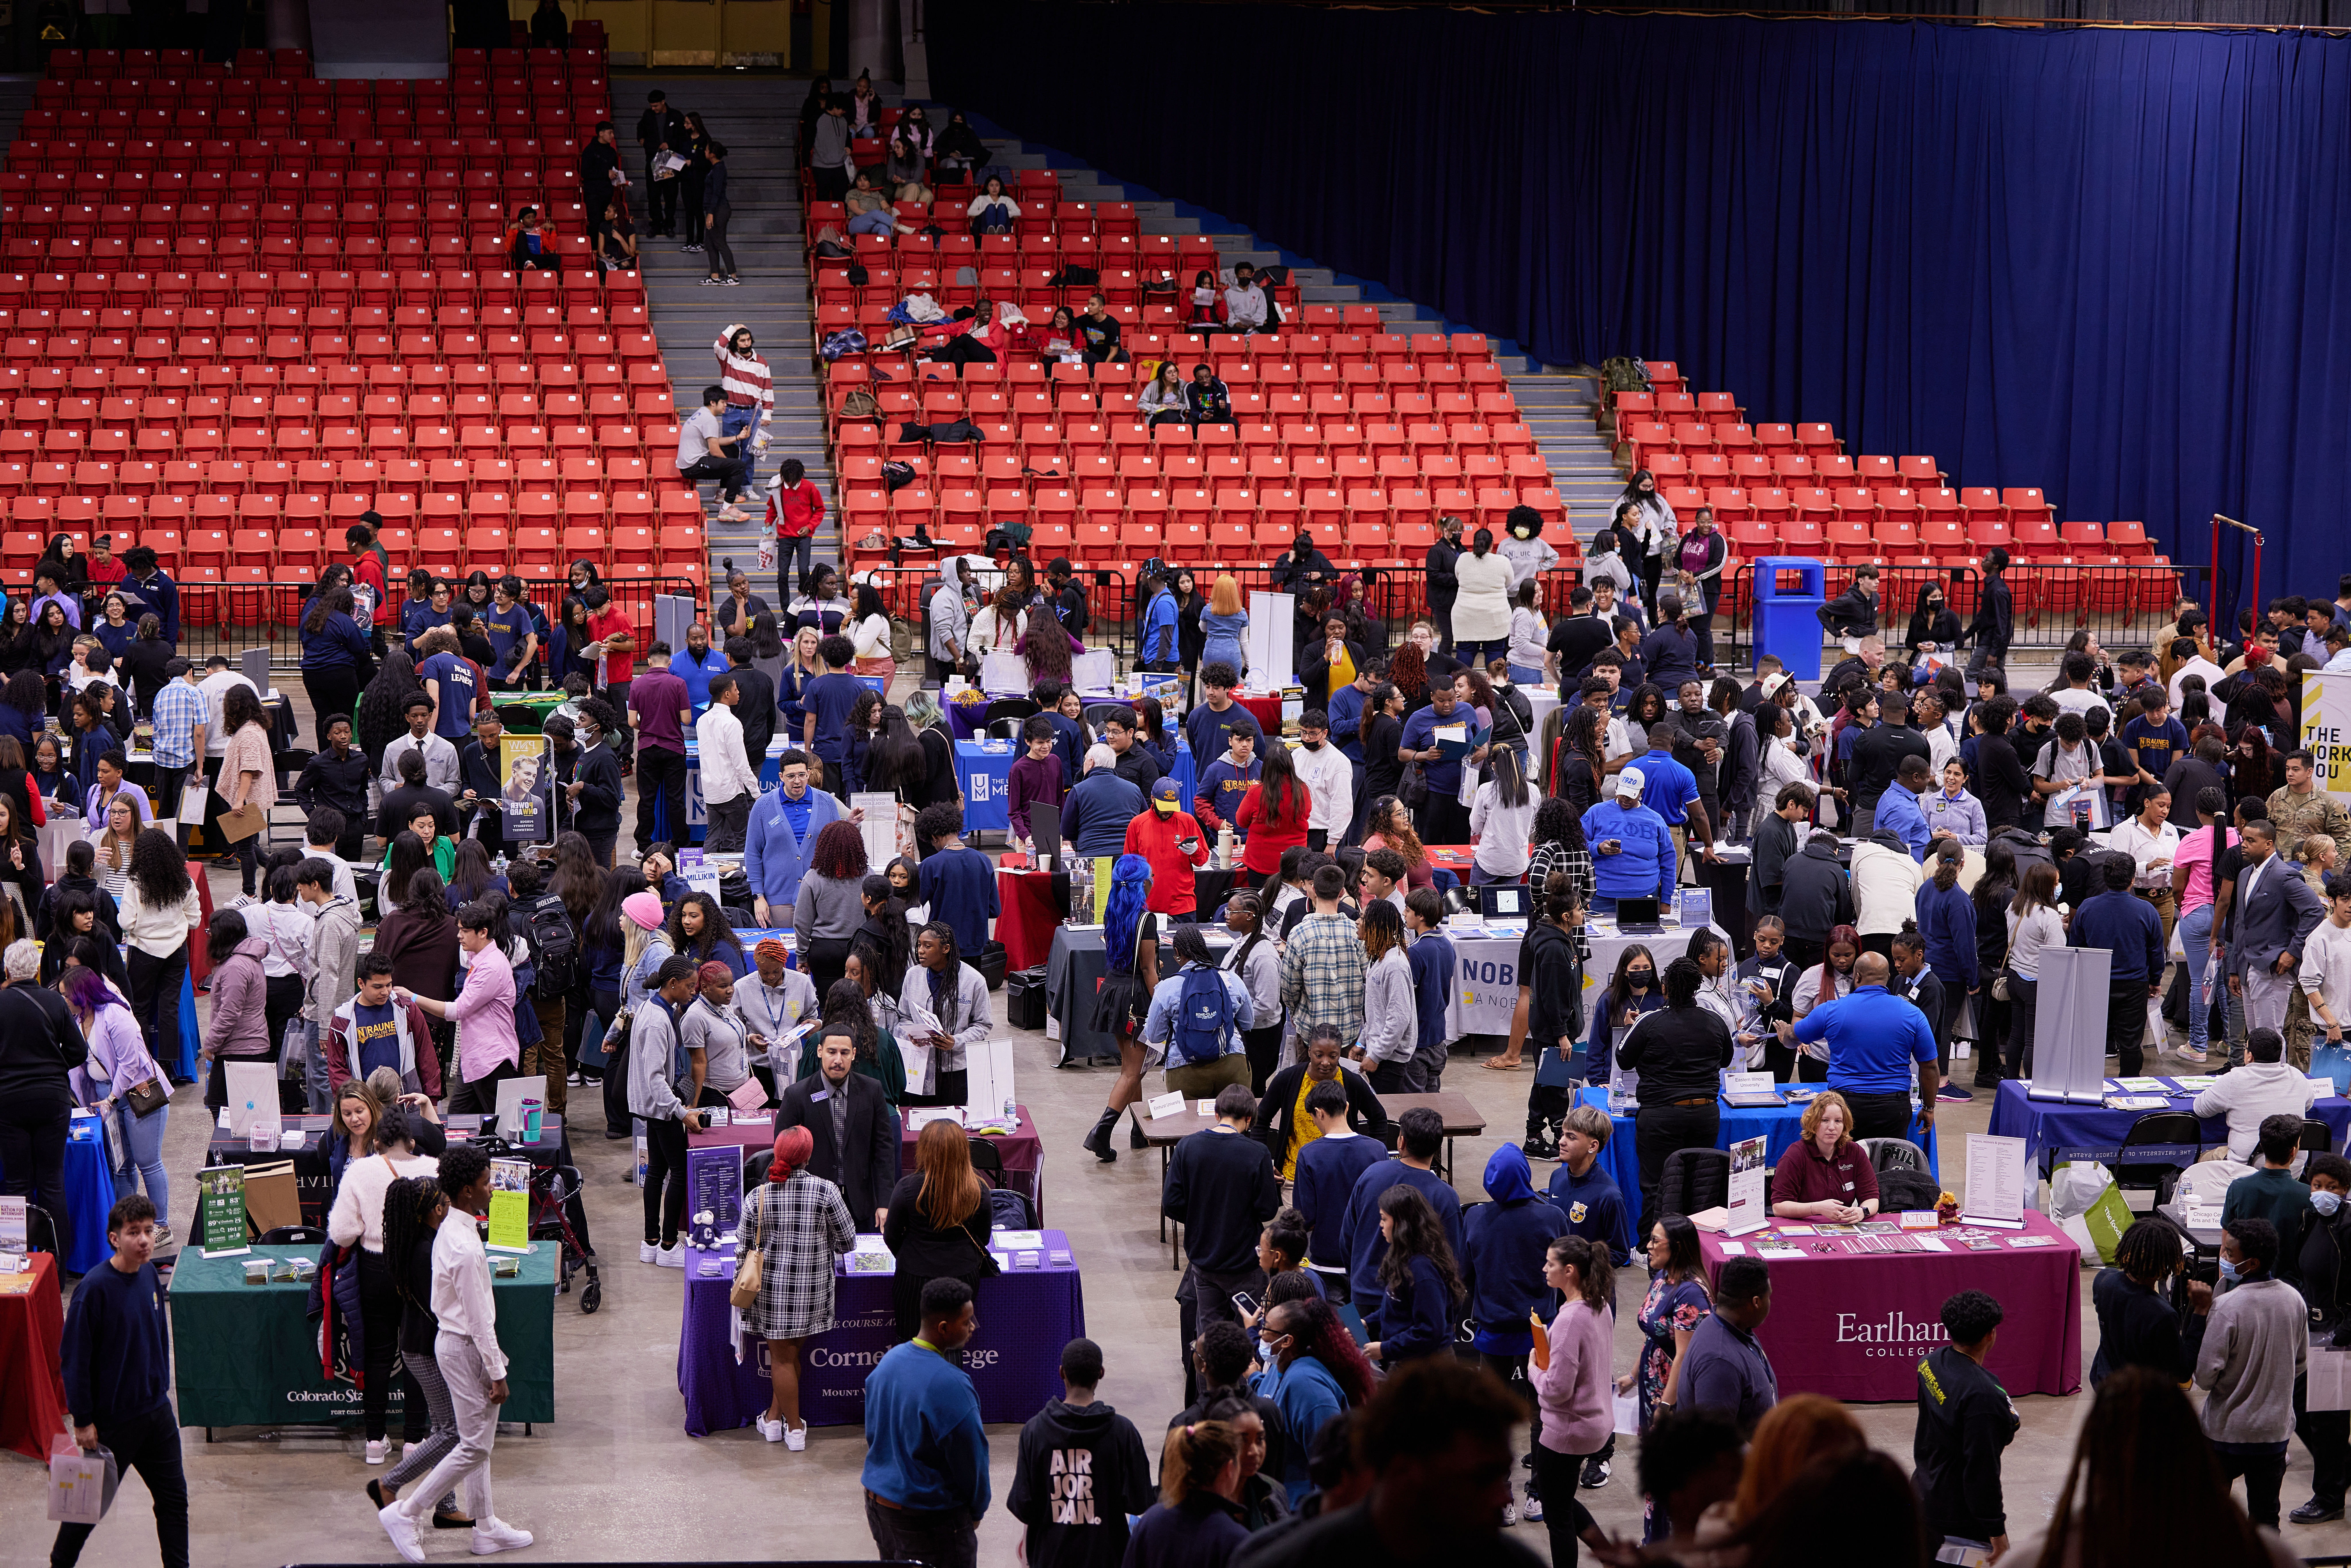 A wide shot of the Noble College Fair. On the top of the image, the orange seats are located. Some students are sitting down. Some students are sitting in the steps of the stairs. On the floor, there is crowded paths and booths filled with college recruiters and students.